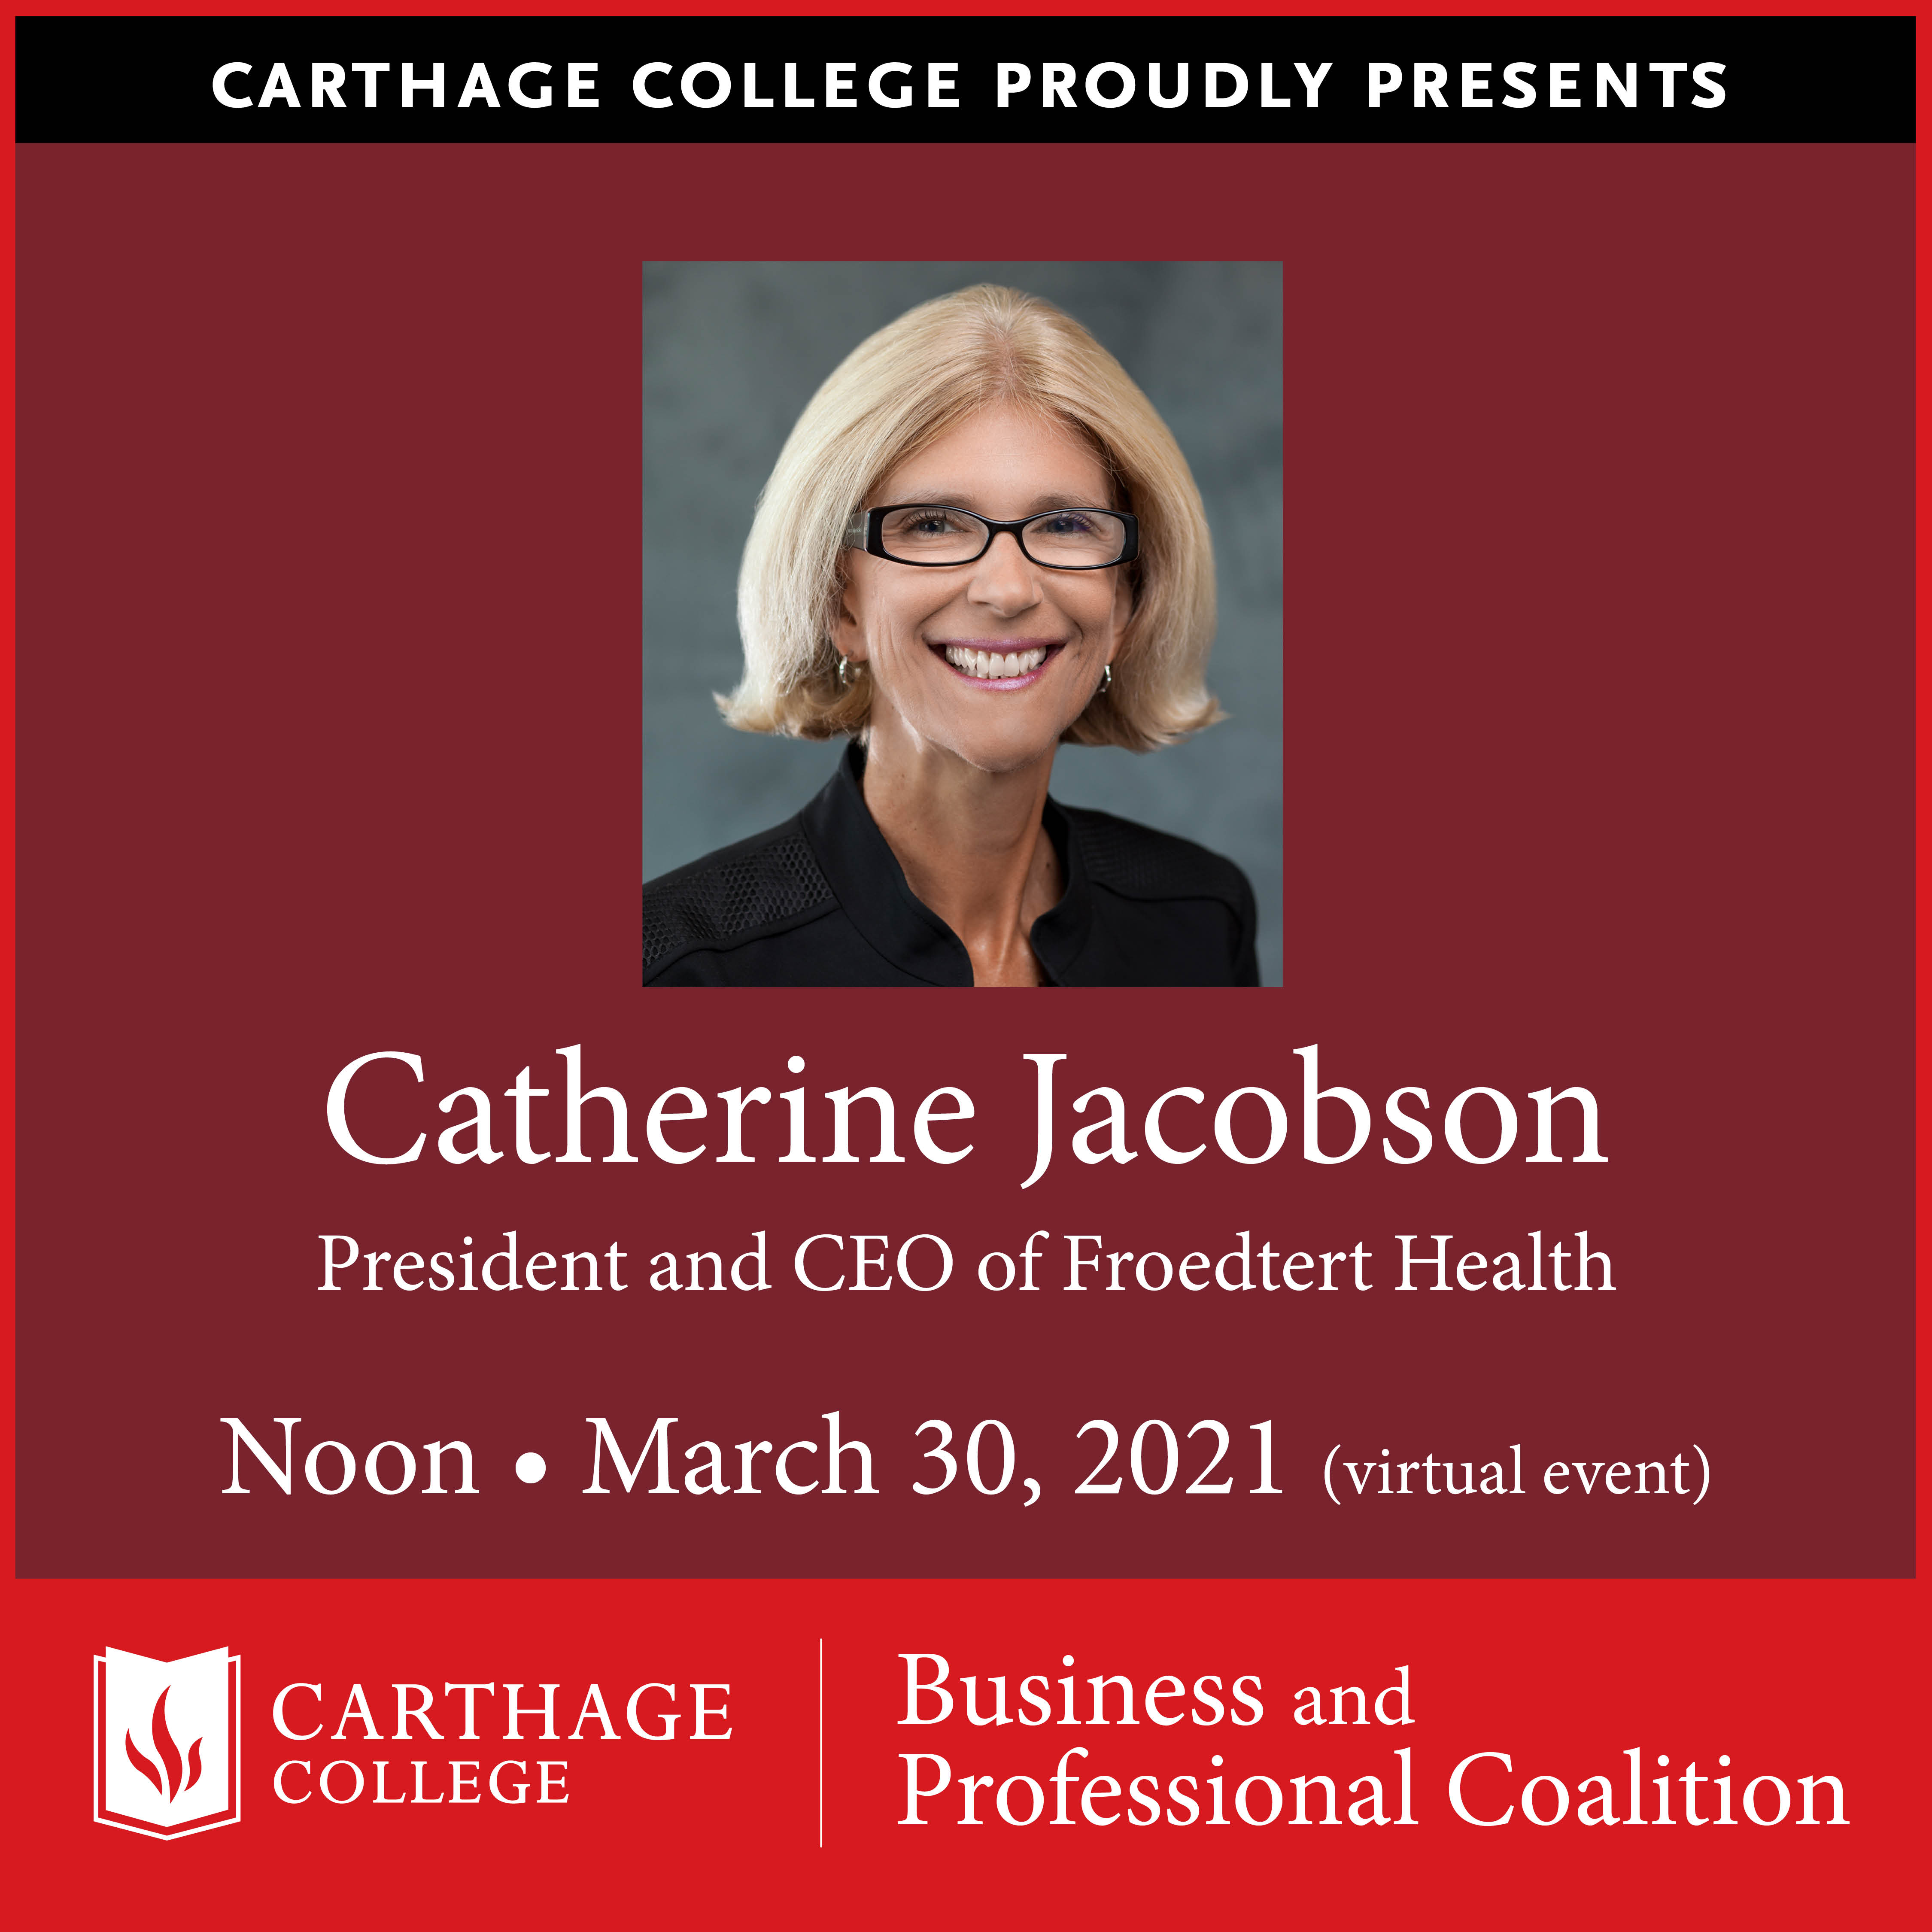 Carthage College Virtual Event with Catherine Jacobson, President and CEO, Froedtert Health